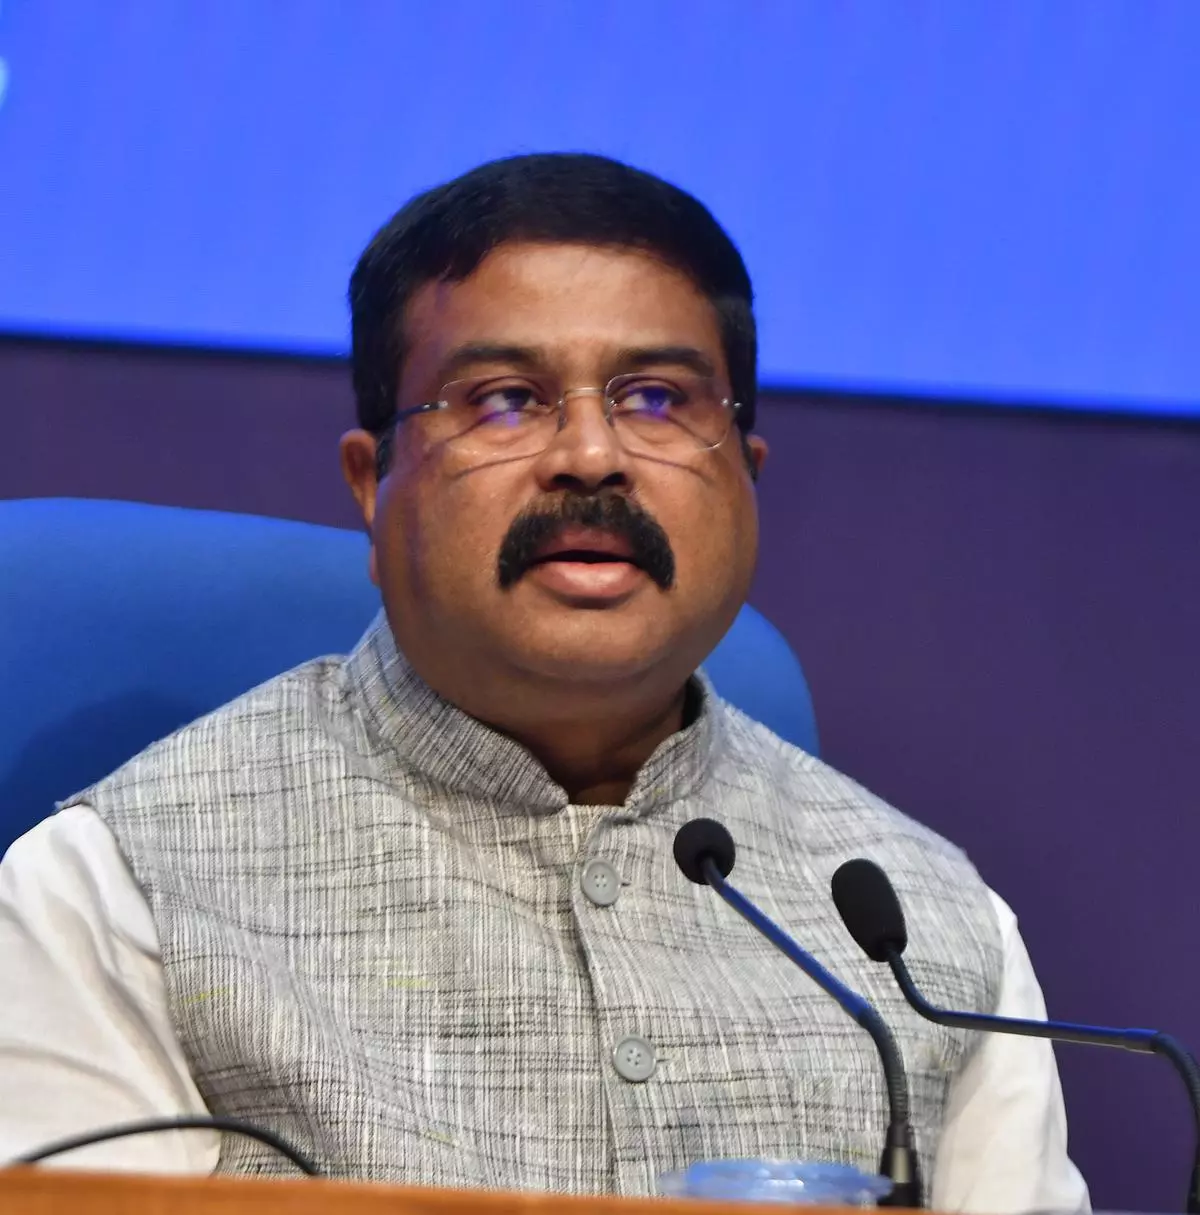 Education Minister Dharmendra Pradhan addressing the media after the Cabinet meeting in Delhi on Wednesday